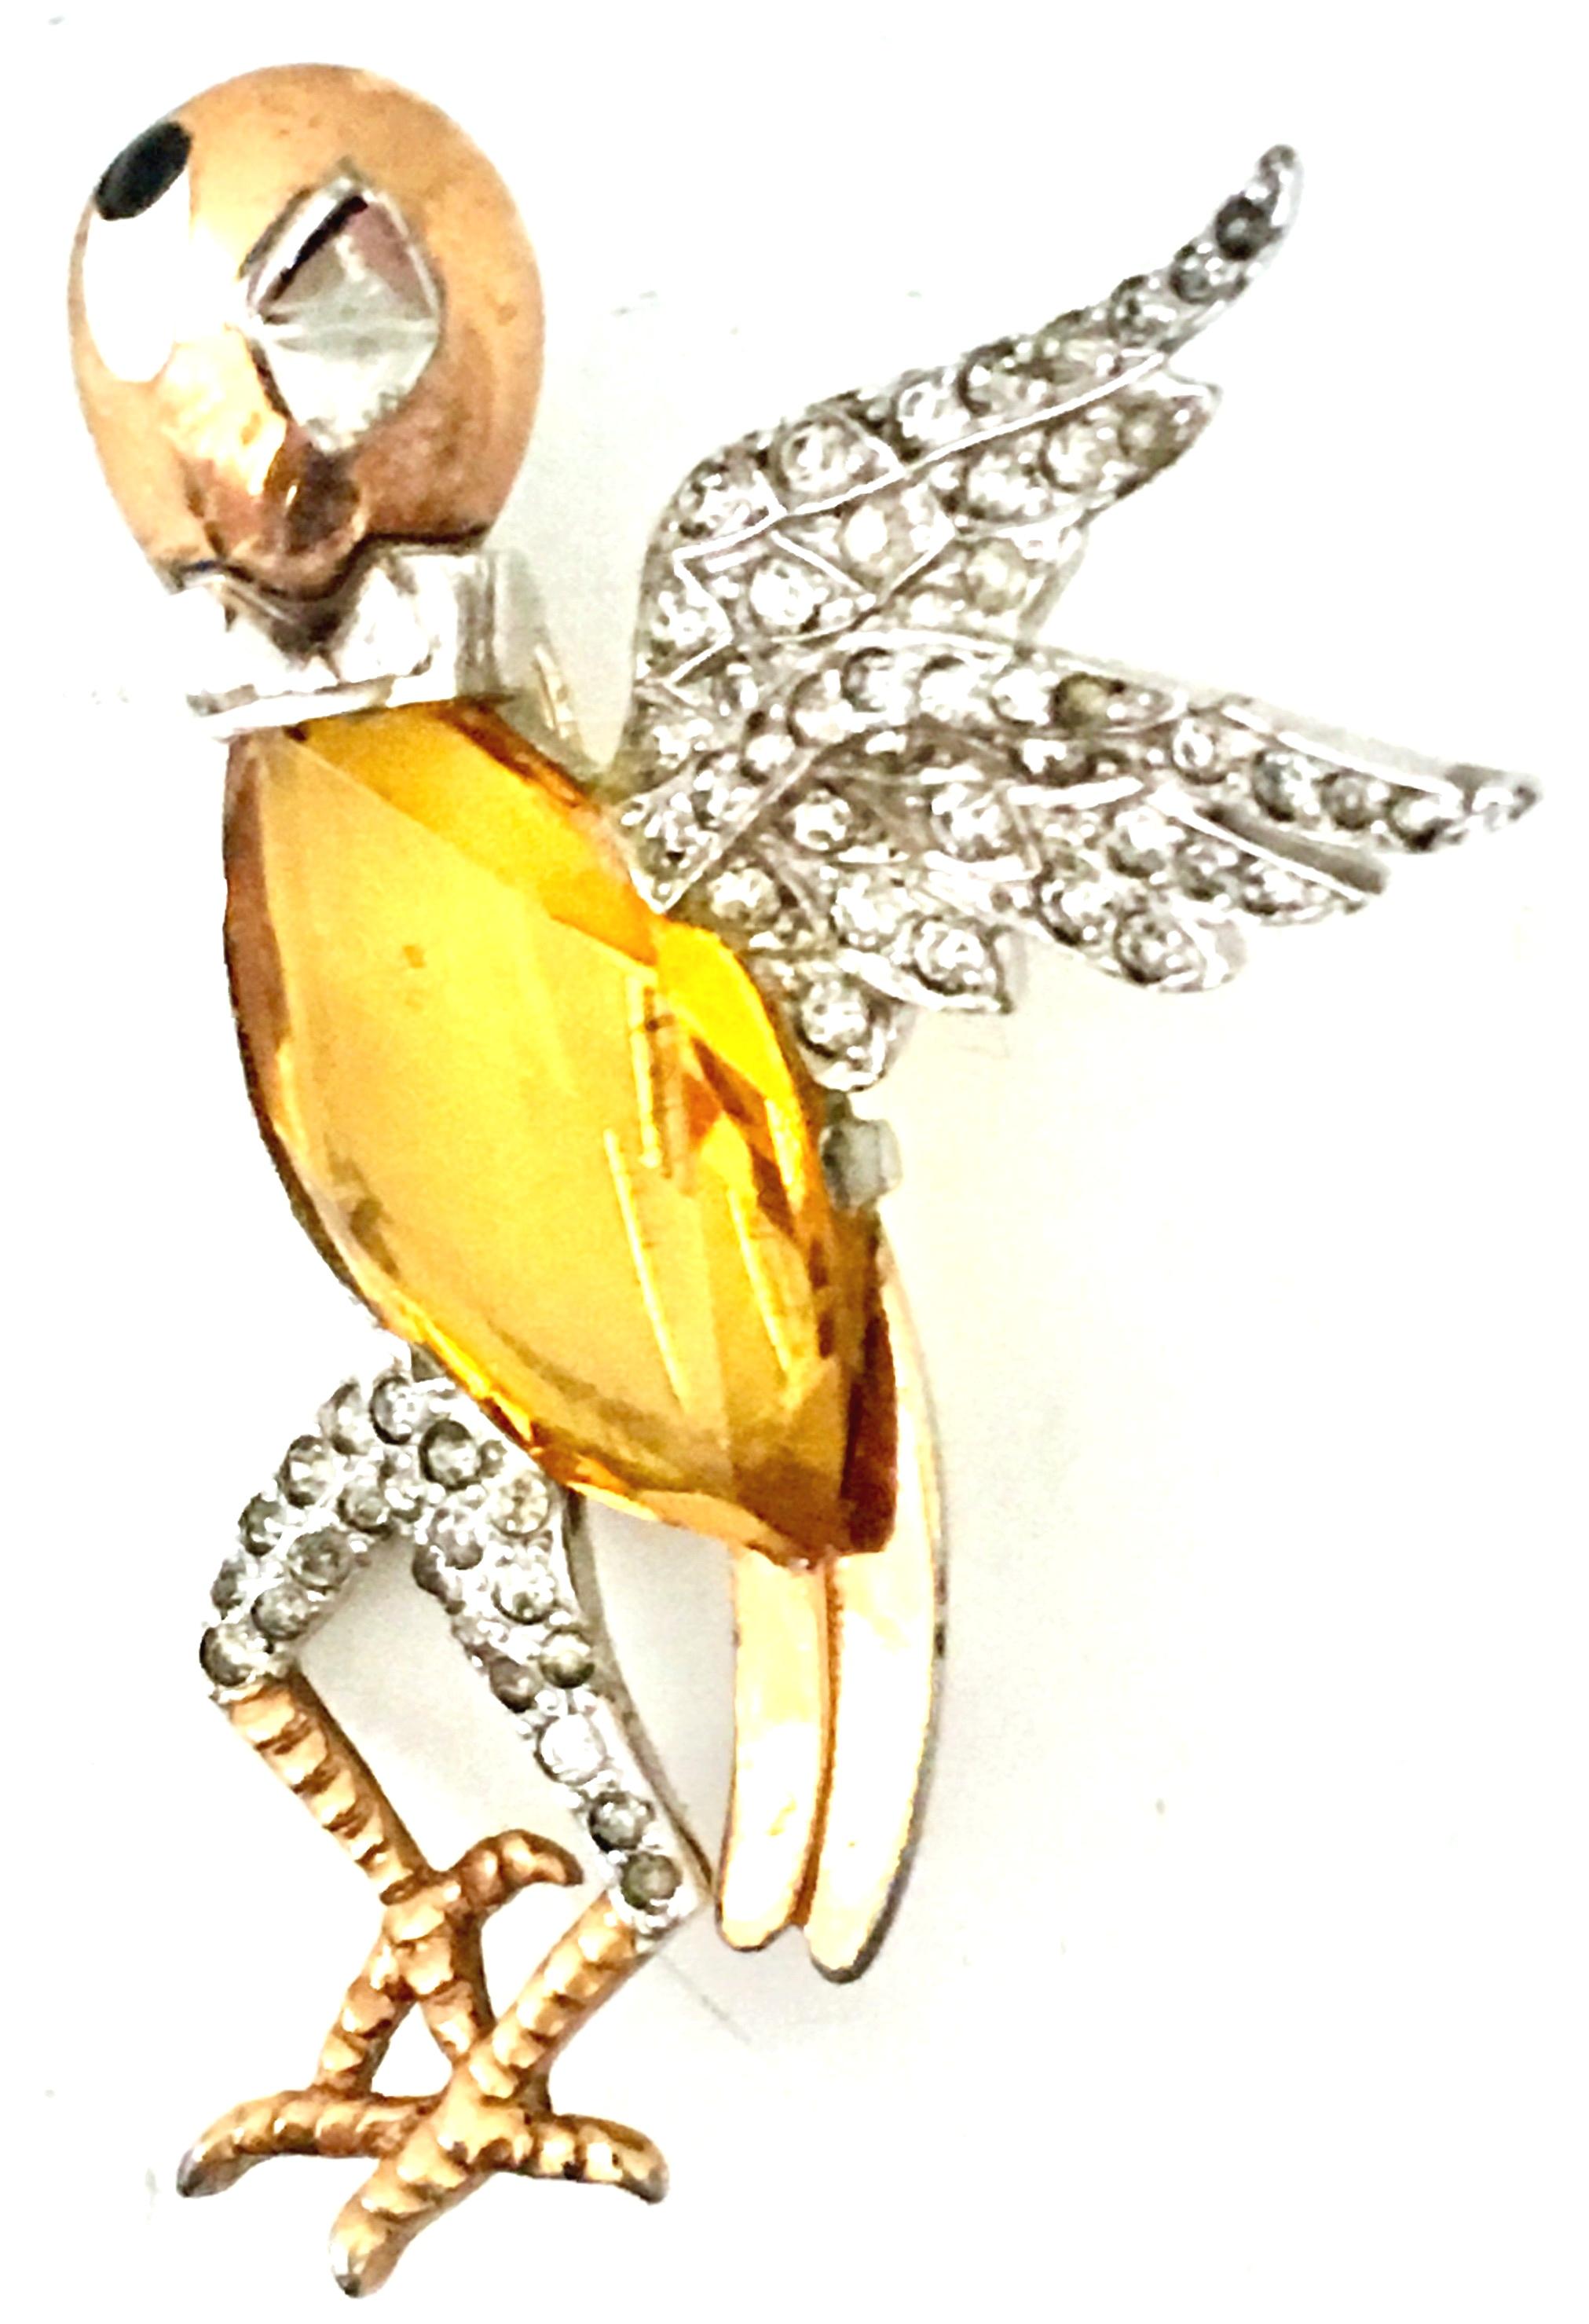 20th Century Silver And Gold Vermeil, Enamel Faceted Cut Art Glass & Austrian Crystal Singing Bird Brooch By, Marcel Boucher. This rare and coveted large scale brooch features a brilliant cut and faceted citrine art glass central stone surrounded by